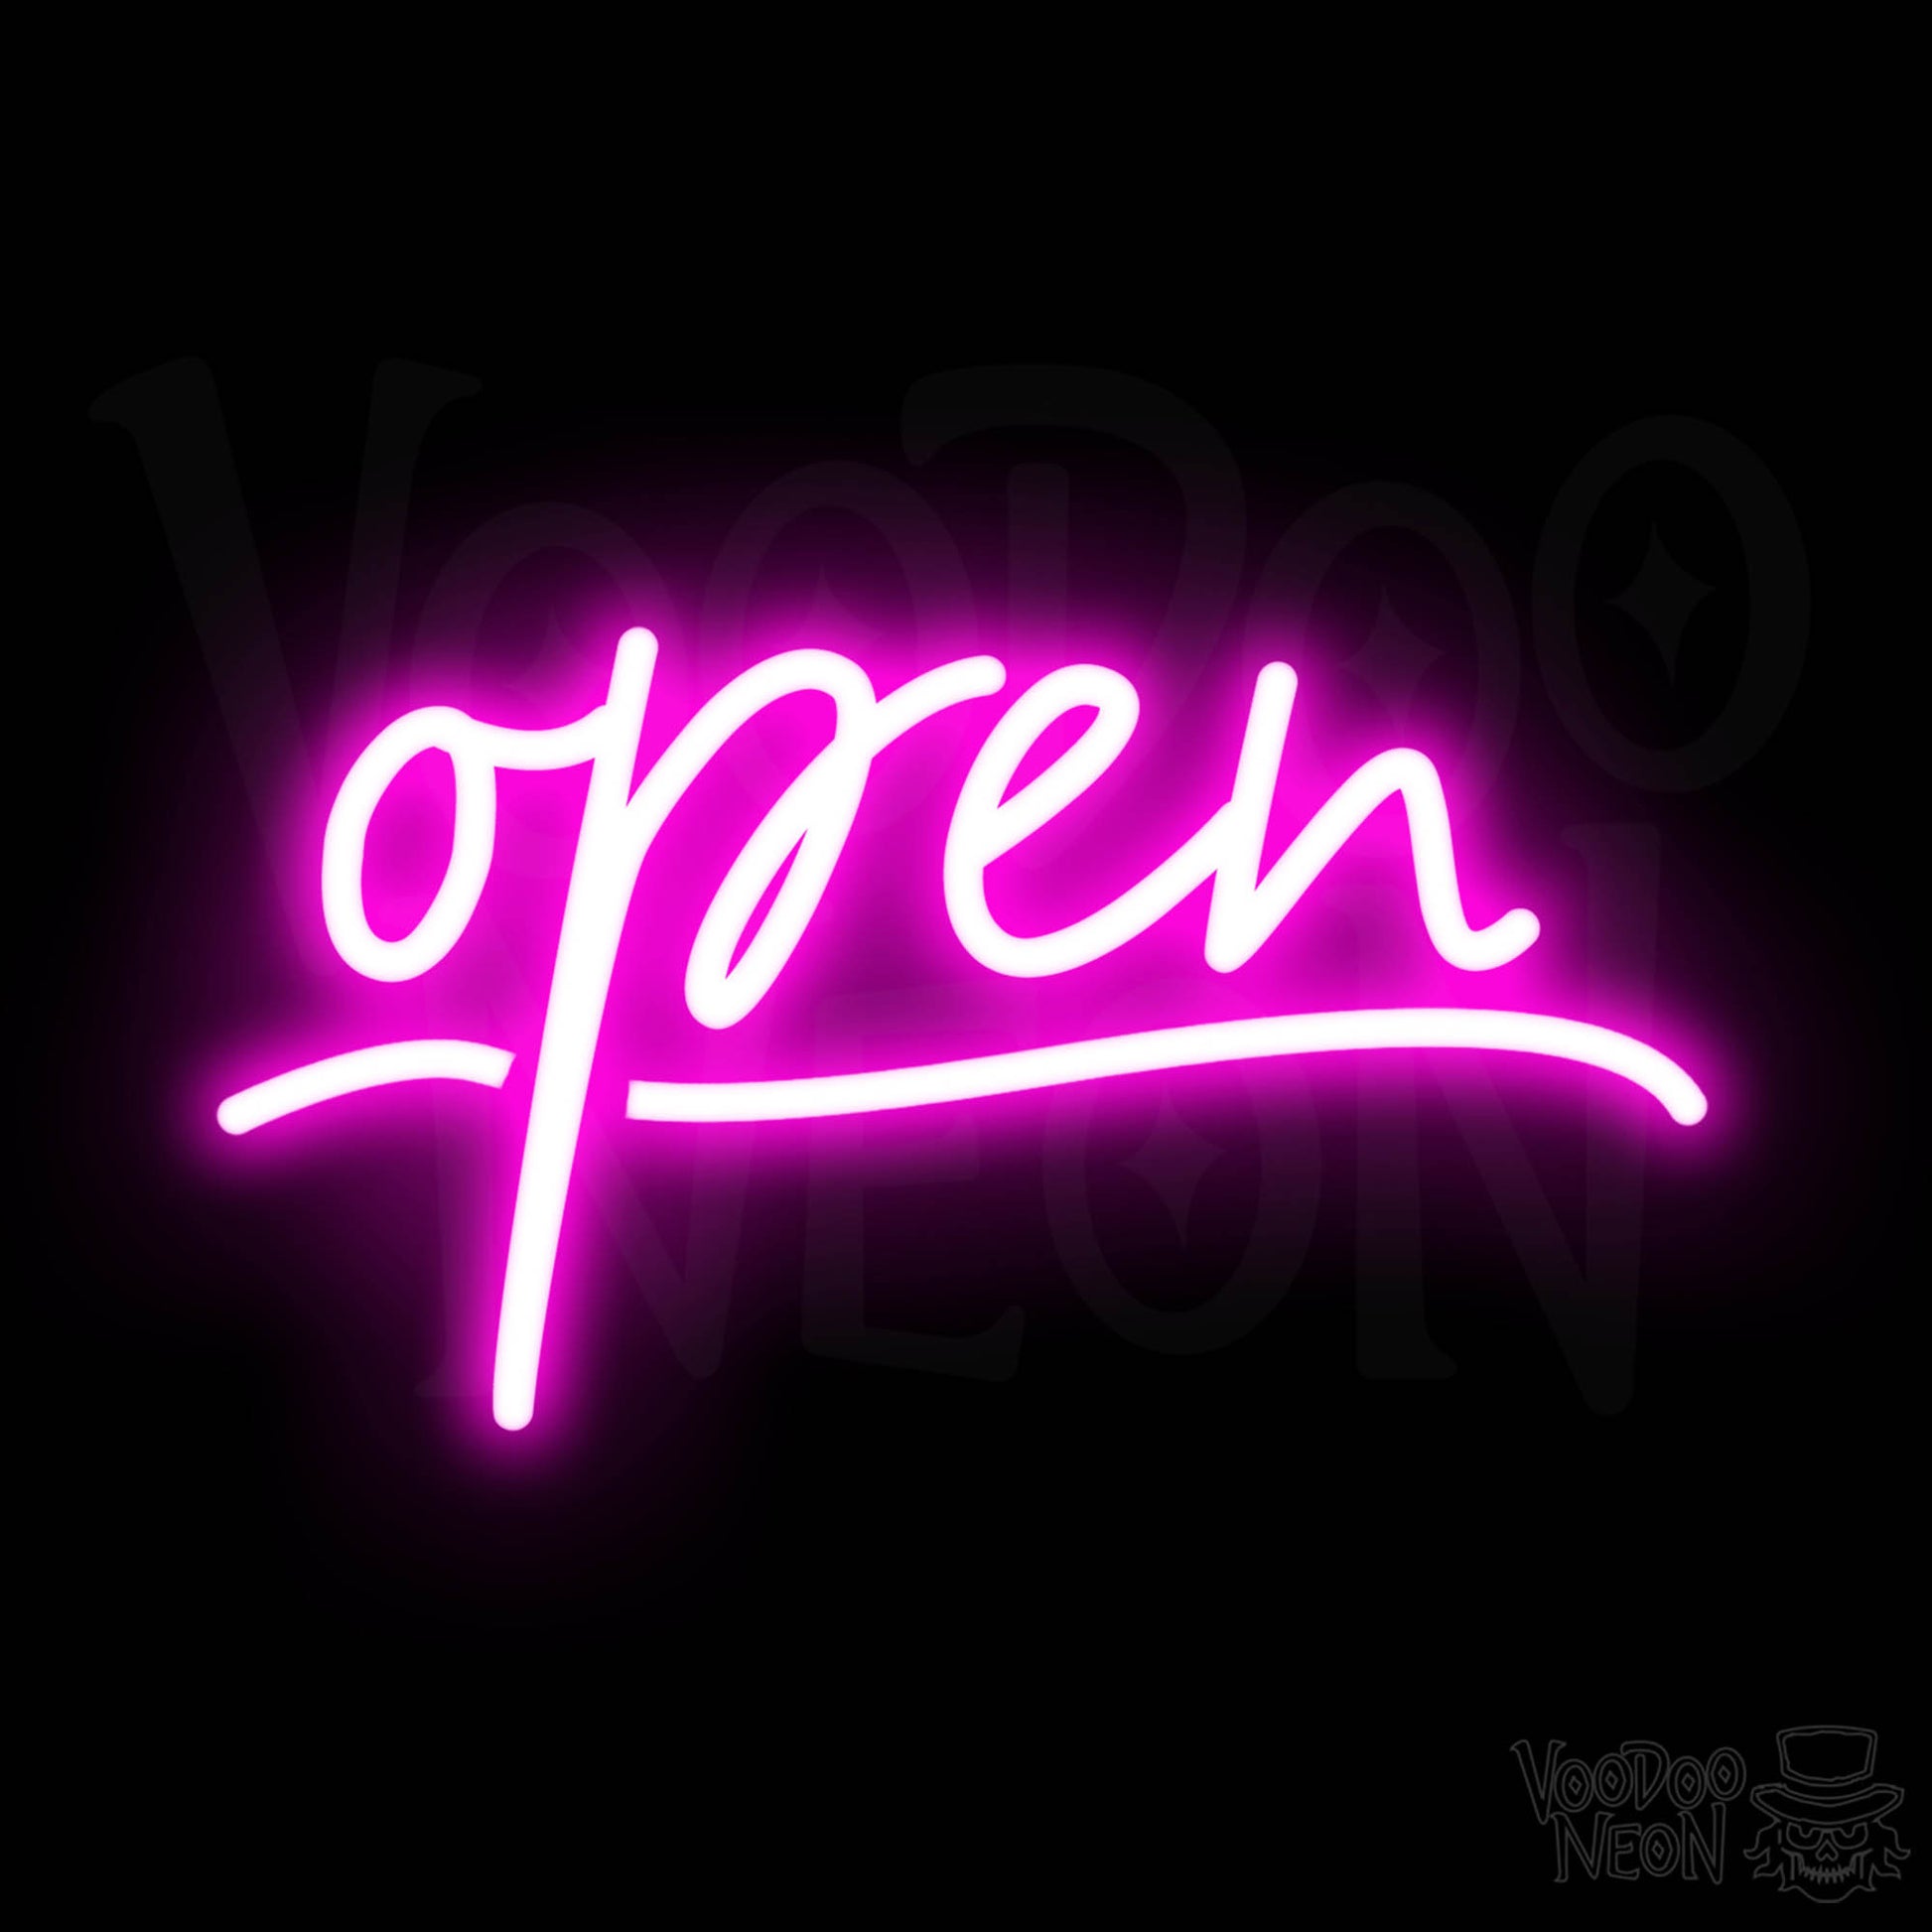 Open LED Neon - Pink